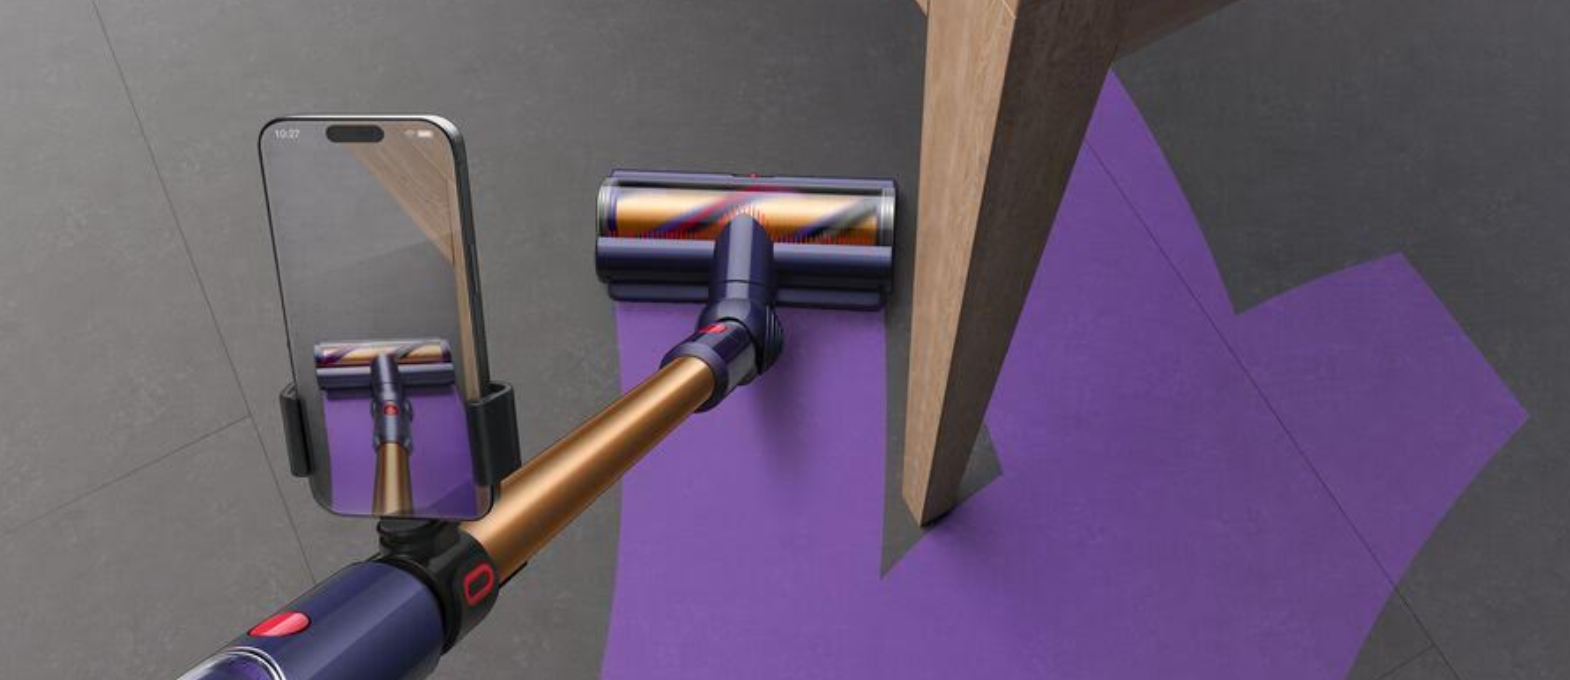 Dyson makes cleaning more efficient with its new AR smart tech cleaning tool - techbuzzireland